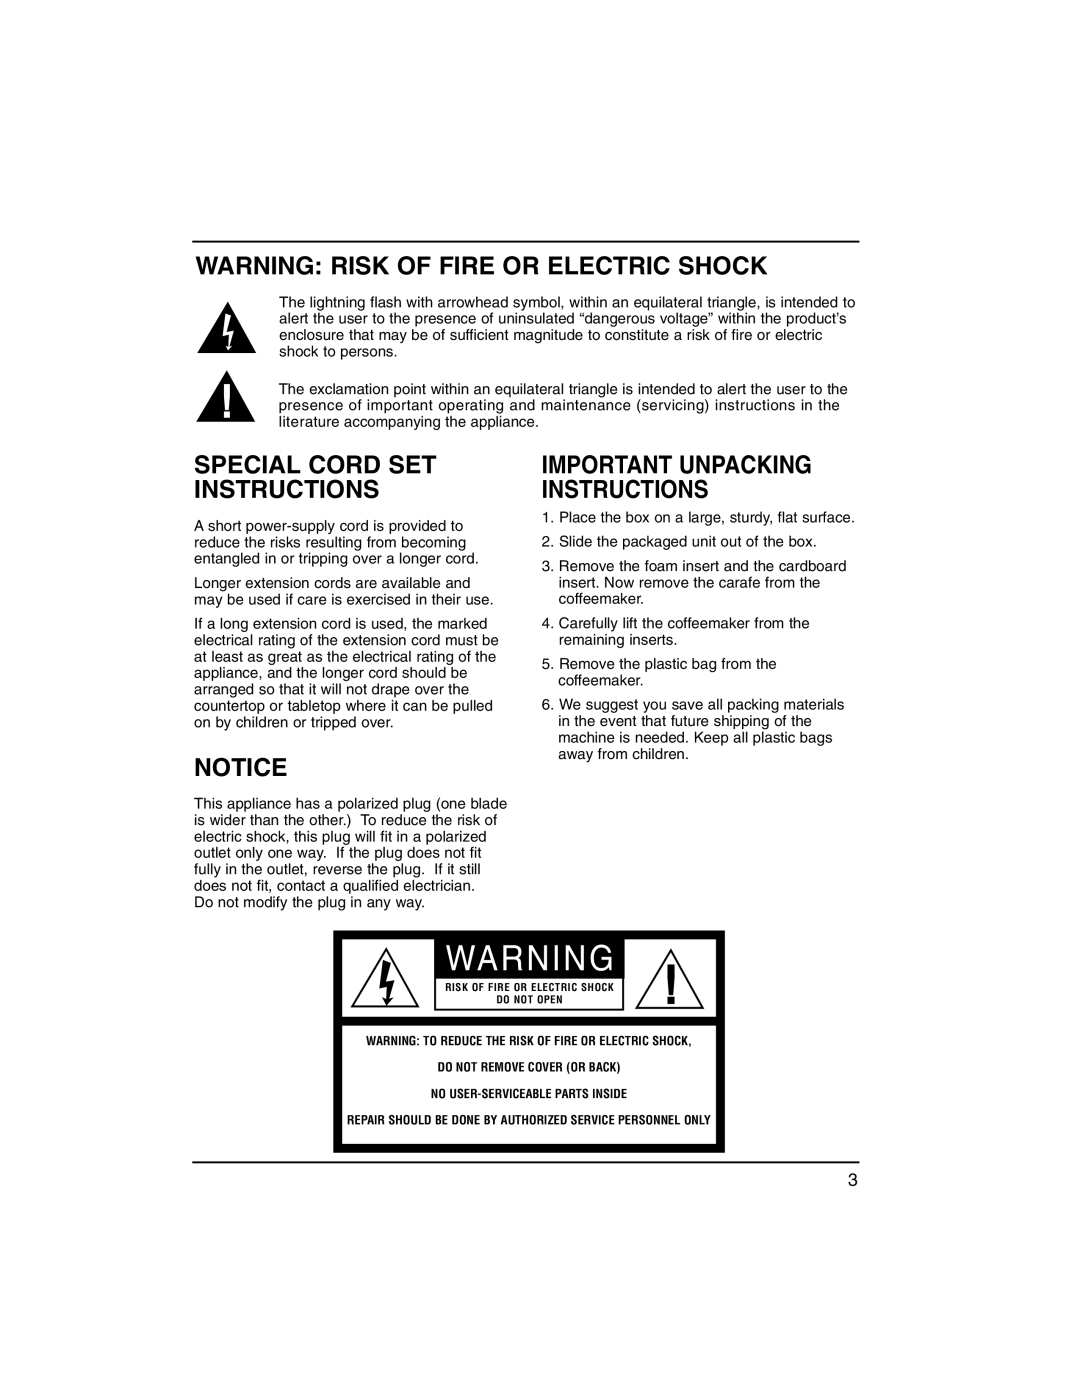 Cuisinart dgb300 Warning Risk Of Fire Or Electric Shock, Special Cord Set Instructions, Important Unpacking Instructions 